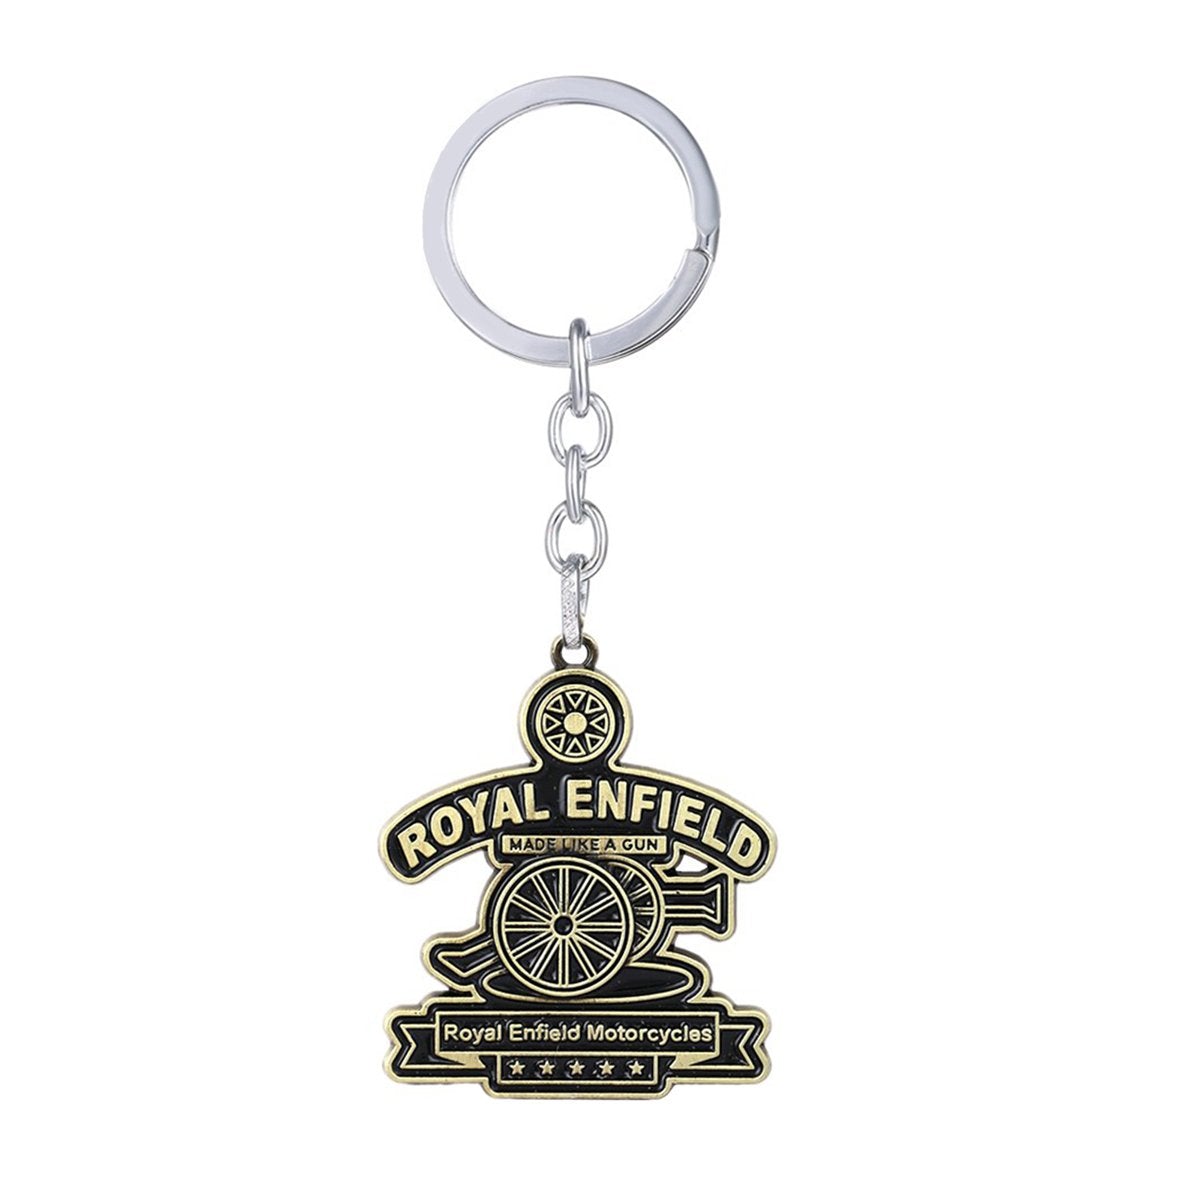 Imported Metallic Key chain for Royal RE Bullet Classic Bike Brass Metal  Keychains Compatible with Royal Enfield for Men and Women (Bike Keyrings)  (Metallic Black) : Amazon.in: Car & Motorbike